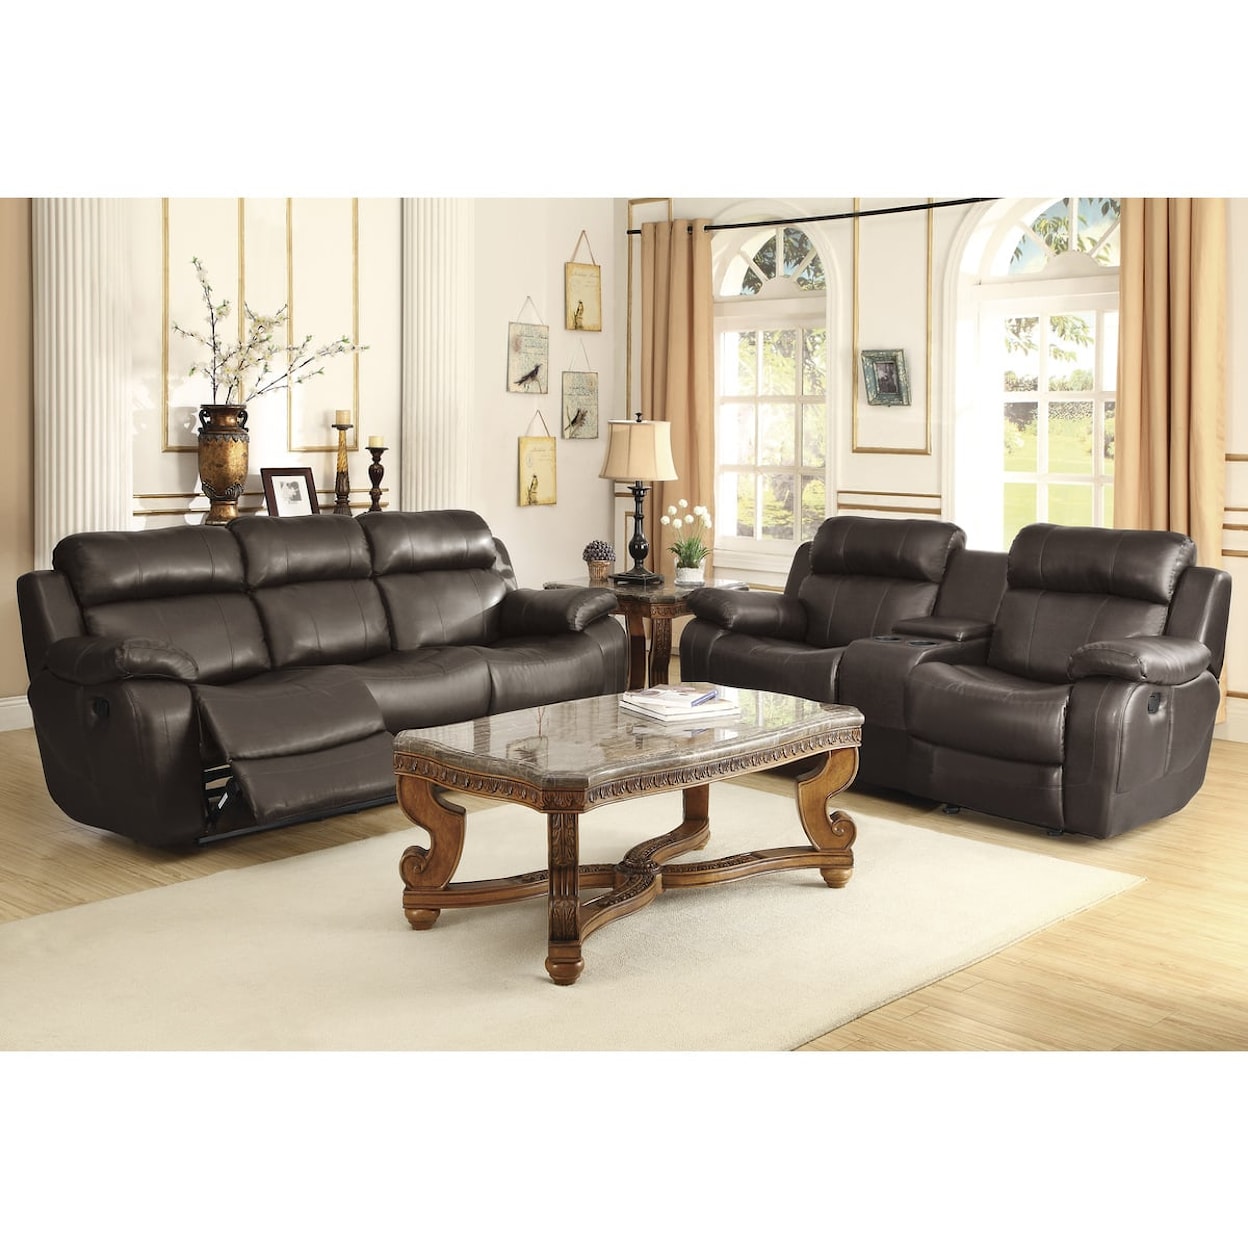 Homelegance Marille Reclining Sofa with Cup Holders